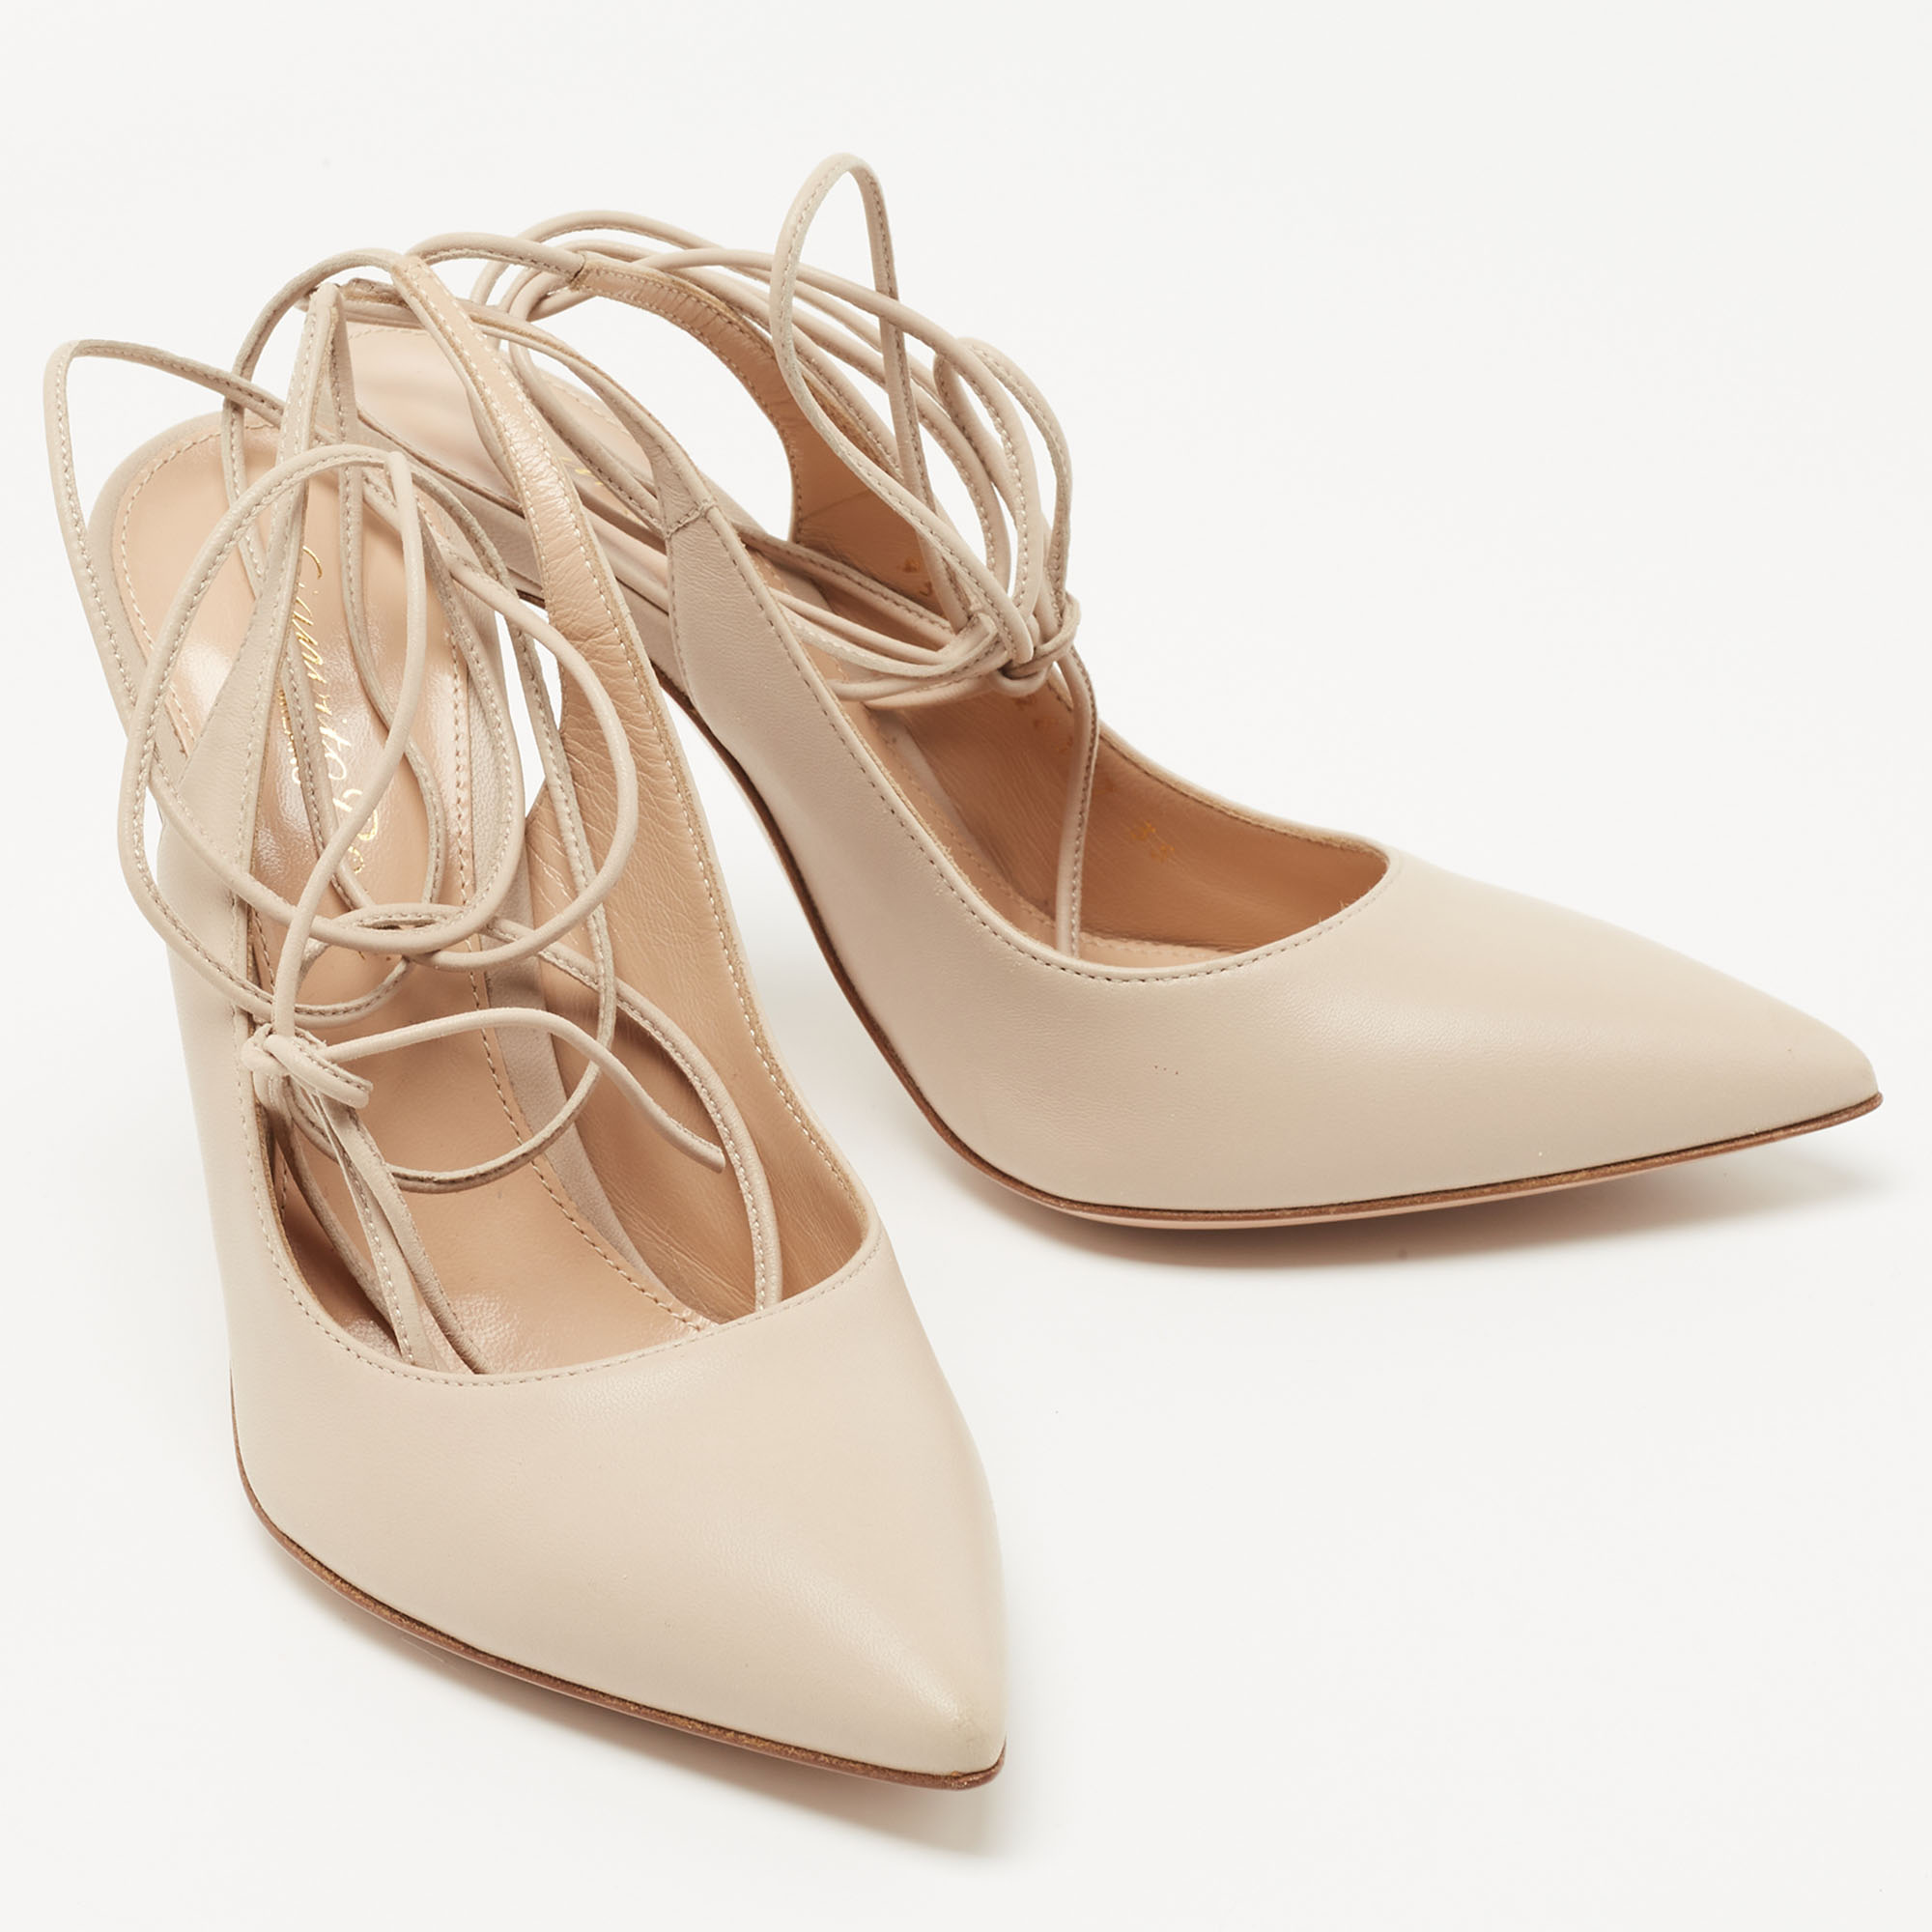 Gianvito Rossi Beige Leather Lace Up Pumps Size 35